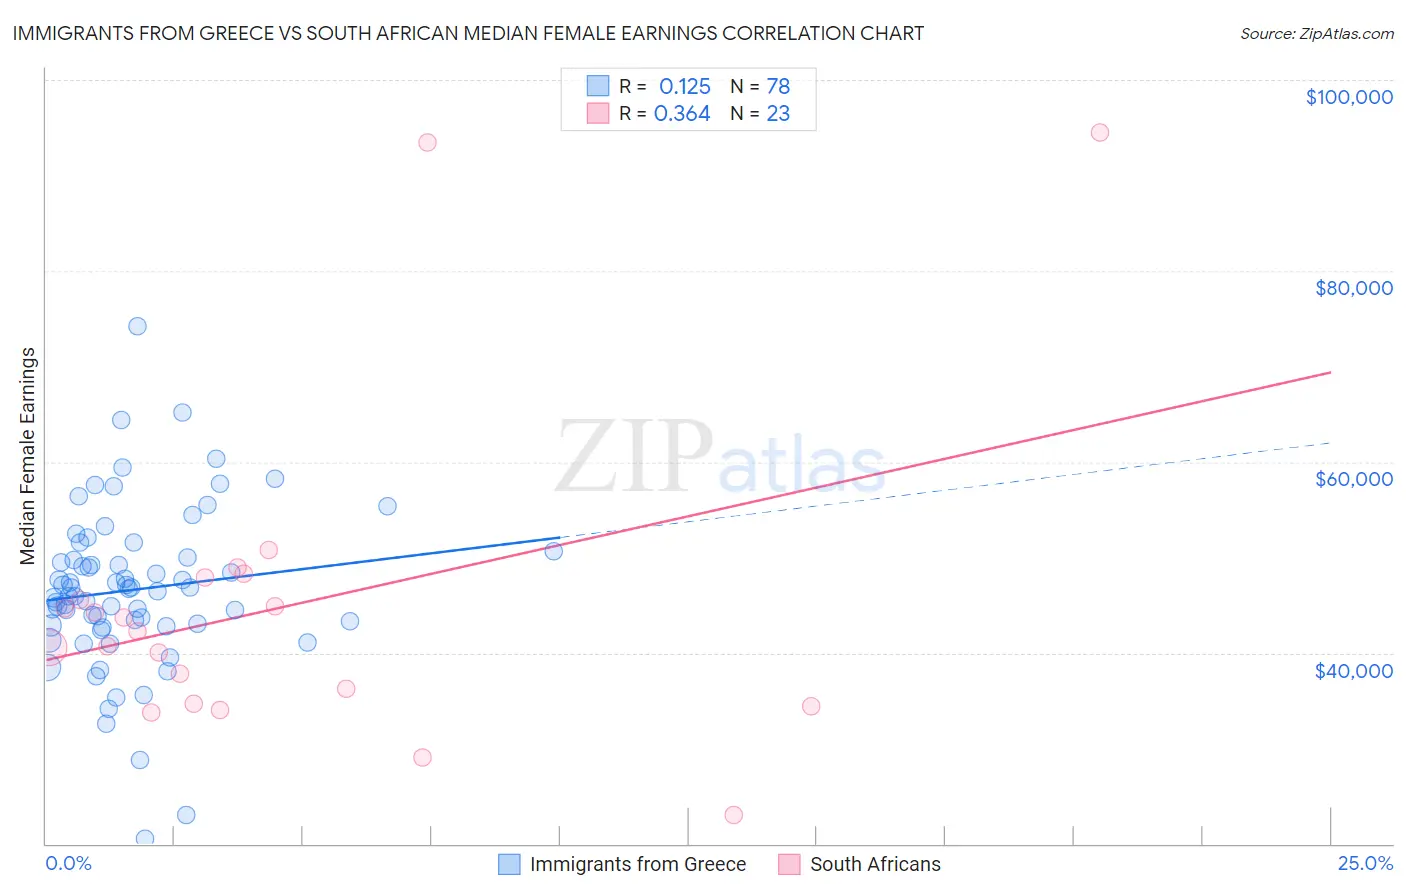 Immigrants from Greece vs South African Median Female Earnings